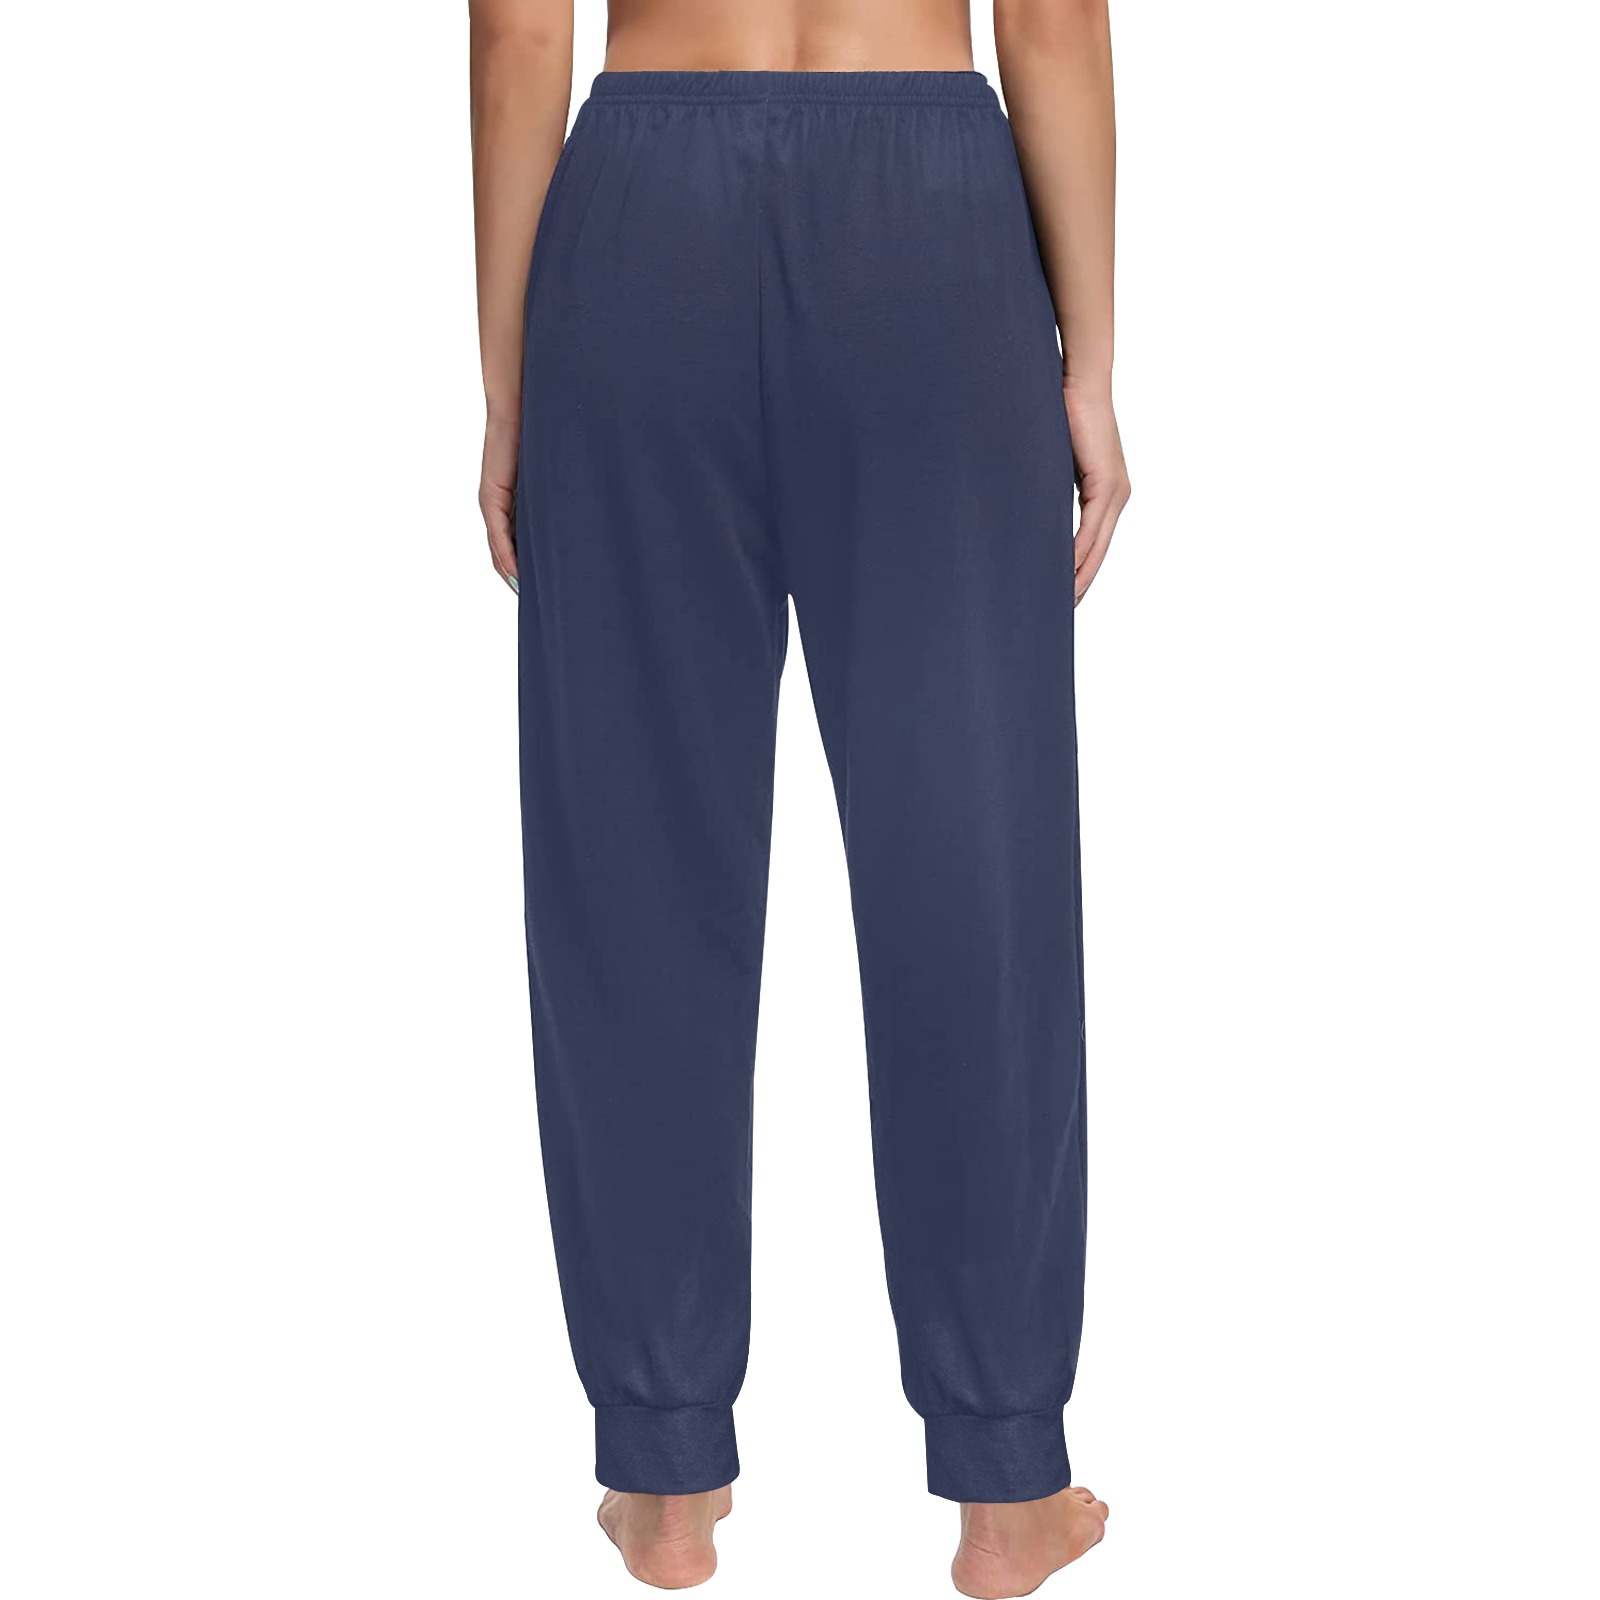 Pants navy with single logo Women's All Over Print Pajama Trousers